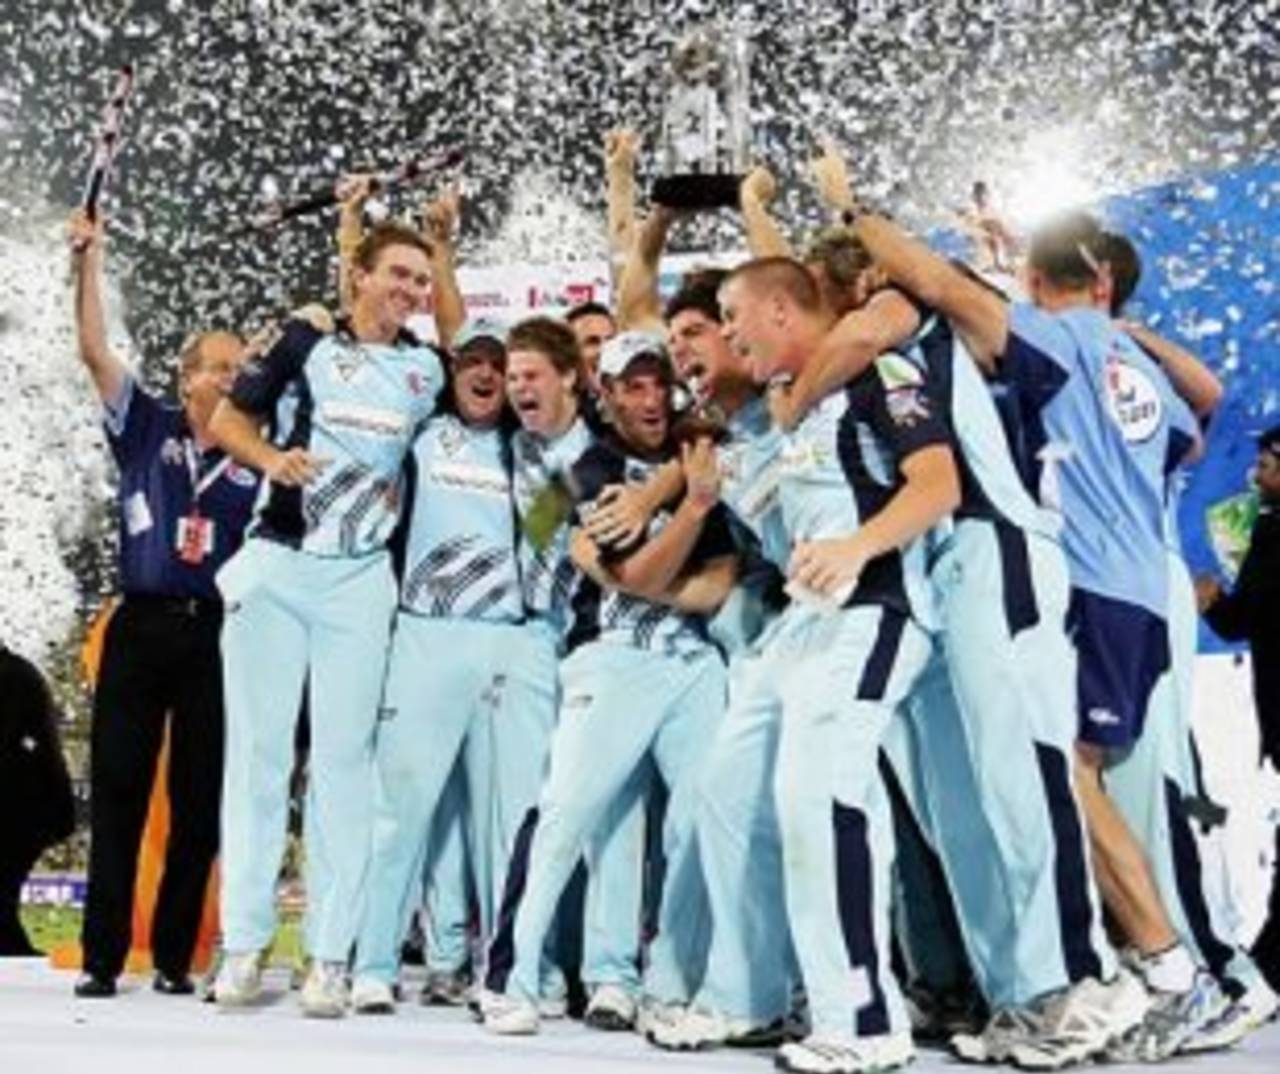 New South Wales were the winners of the inaugural Champions League in India&nbsp;&nbsp;&bull;&nbsp;&nbsp;Global Cricket Ventures-BCCI